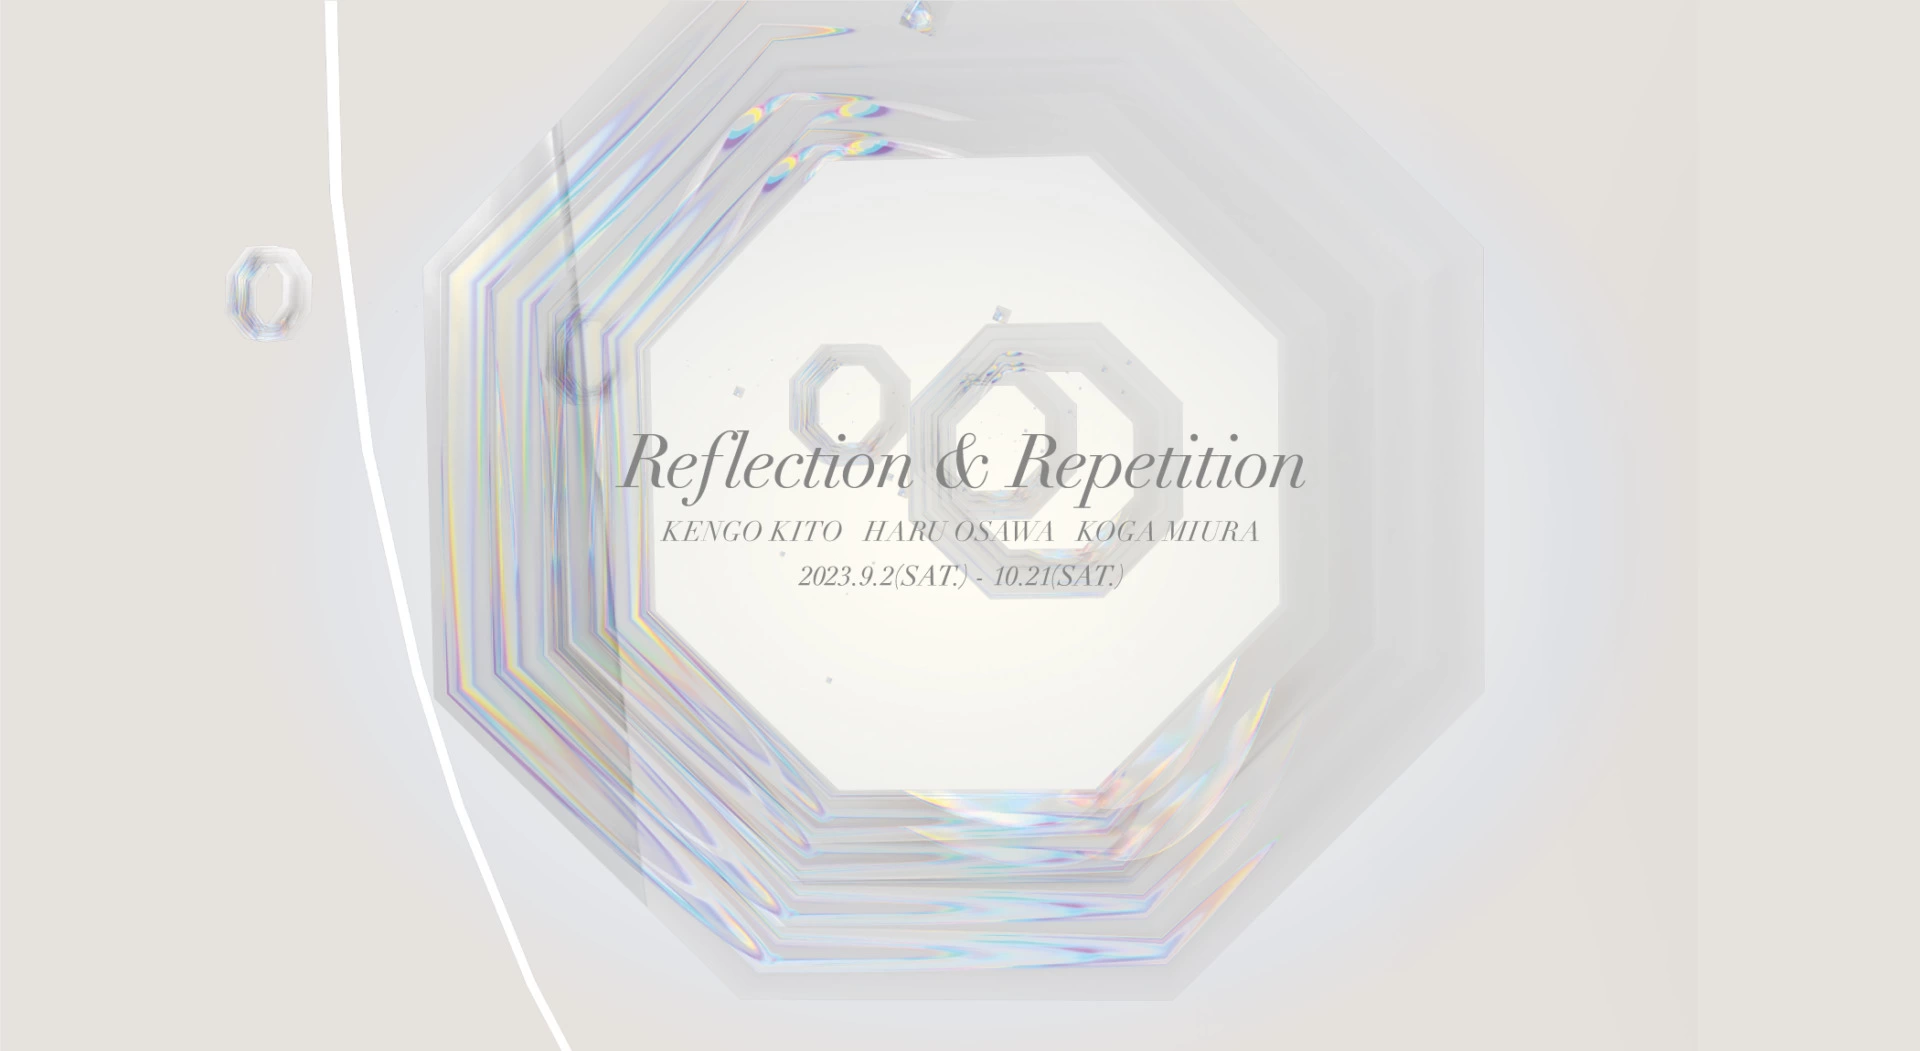 Reflection & Repetition